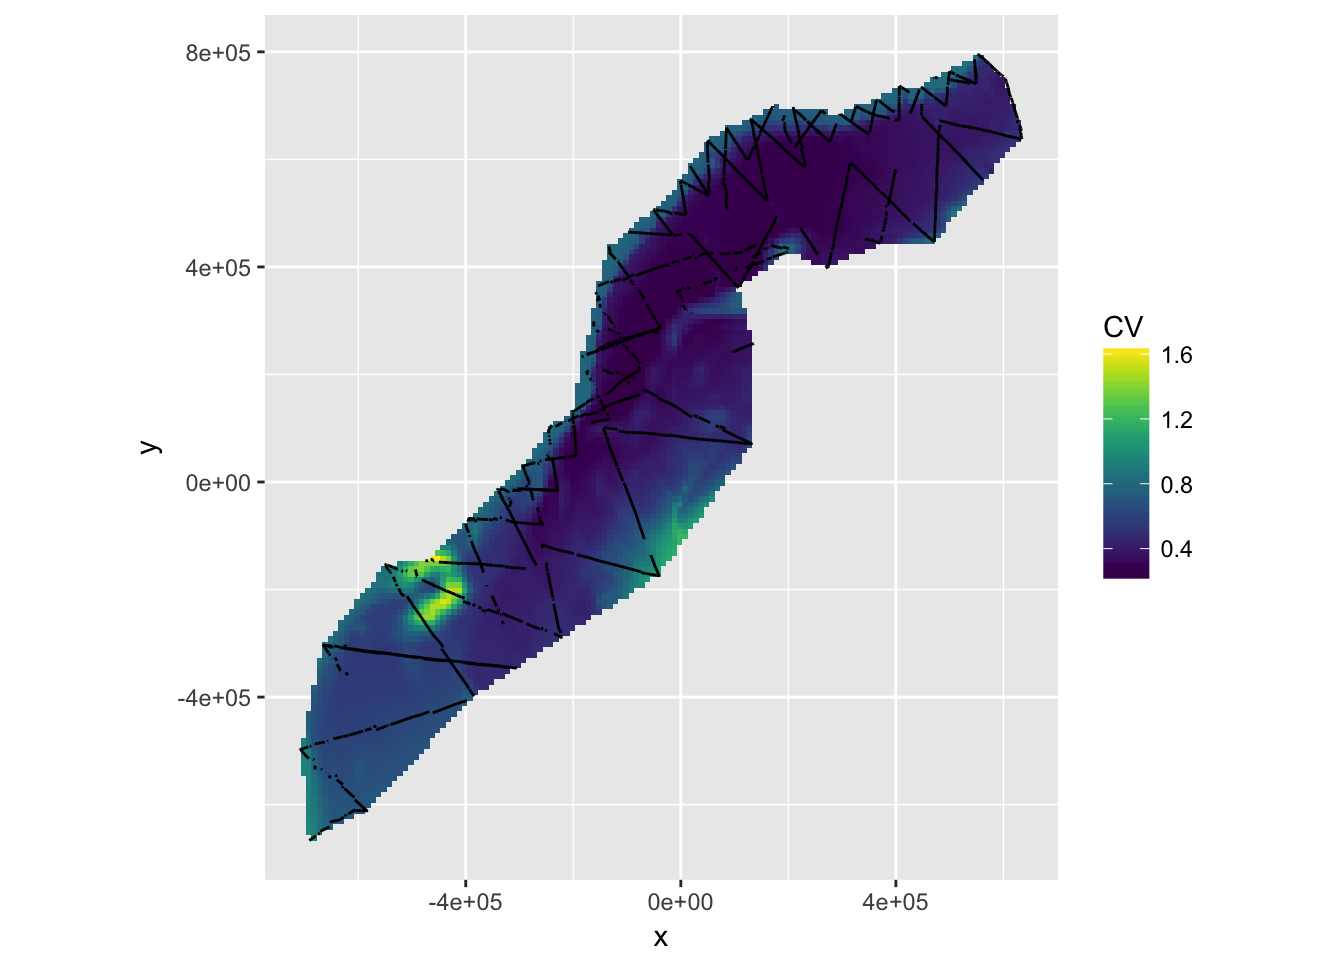 Uncertainty (CV) in prediction surface from bivariate spatial smooth with environmental covariates.  Effort overlaid.